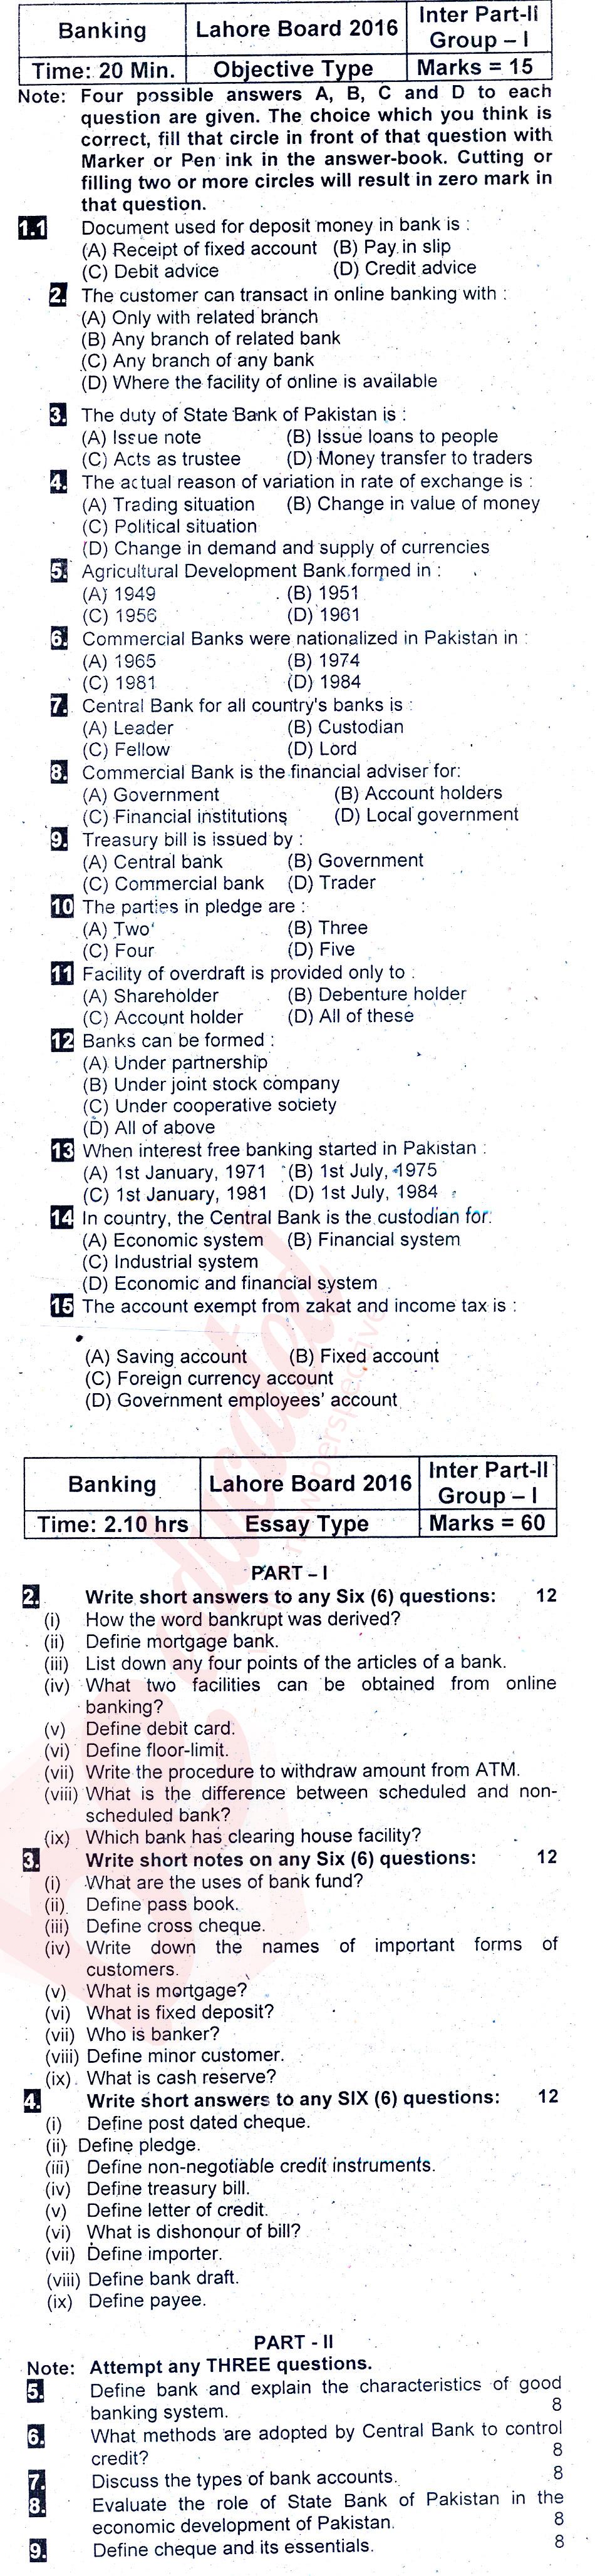 Principles of Banking ICOM Part 2 Past Paper Group 1 BISE Lahore 2016